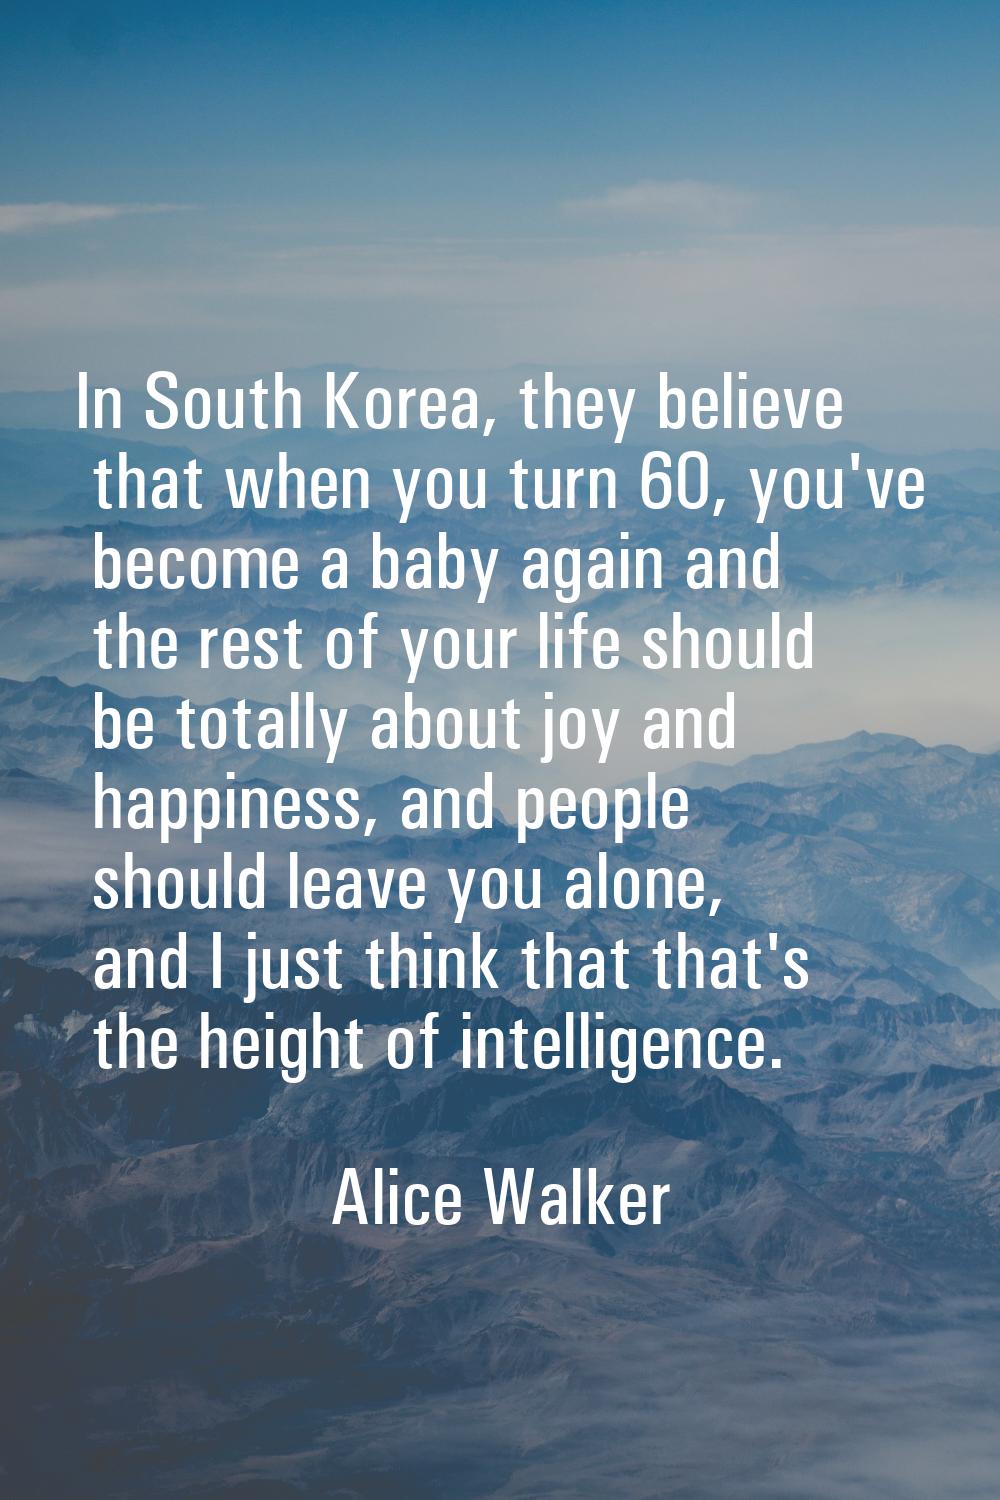 In South Korea, they believe that when you turn 60, you've become a baby again and the rest of your